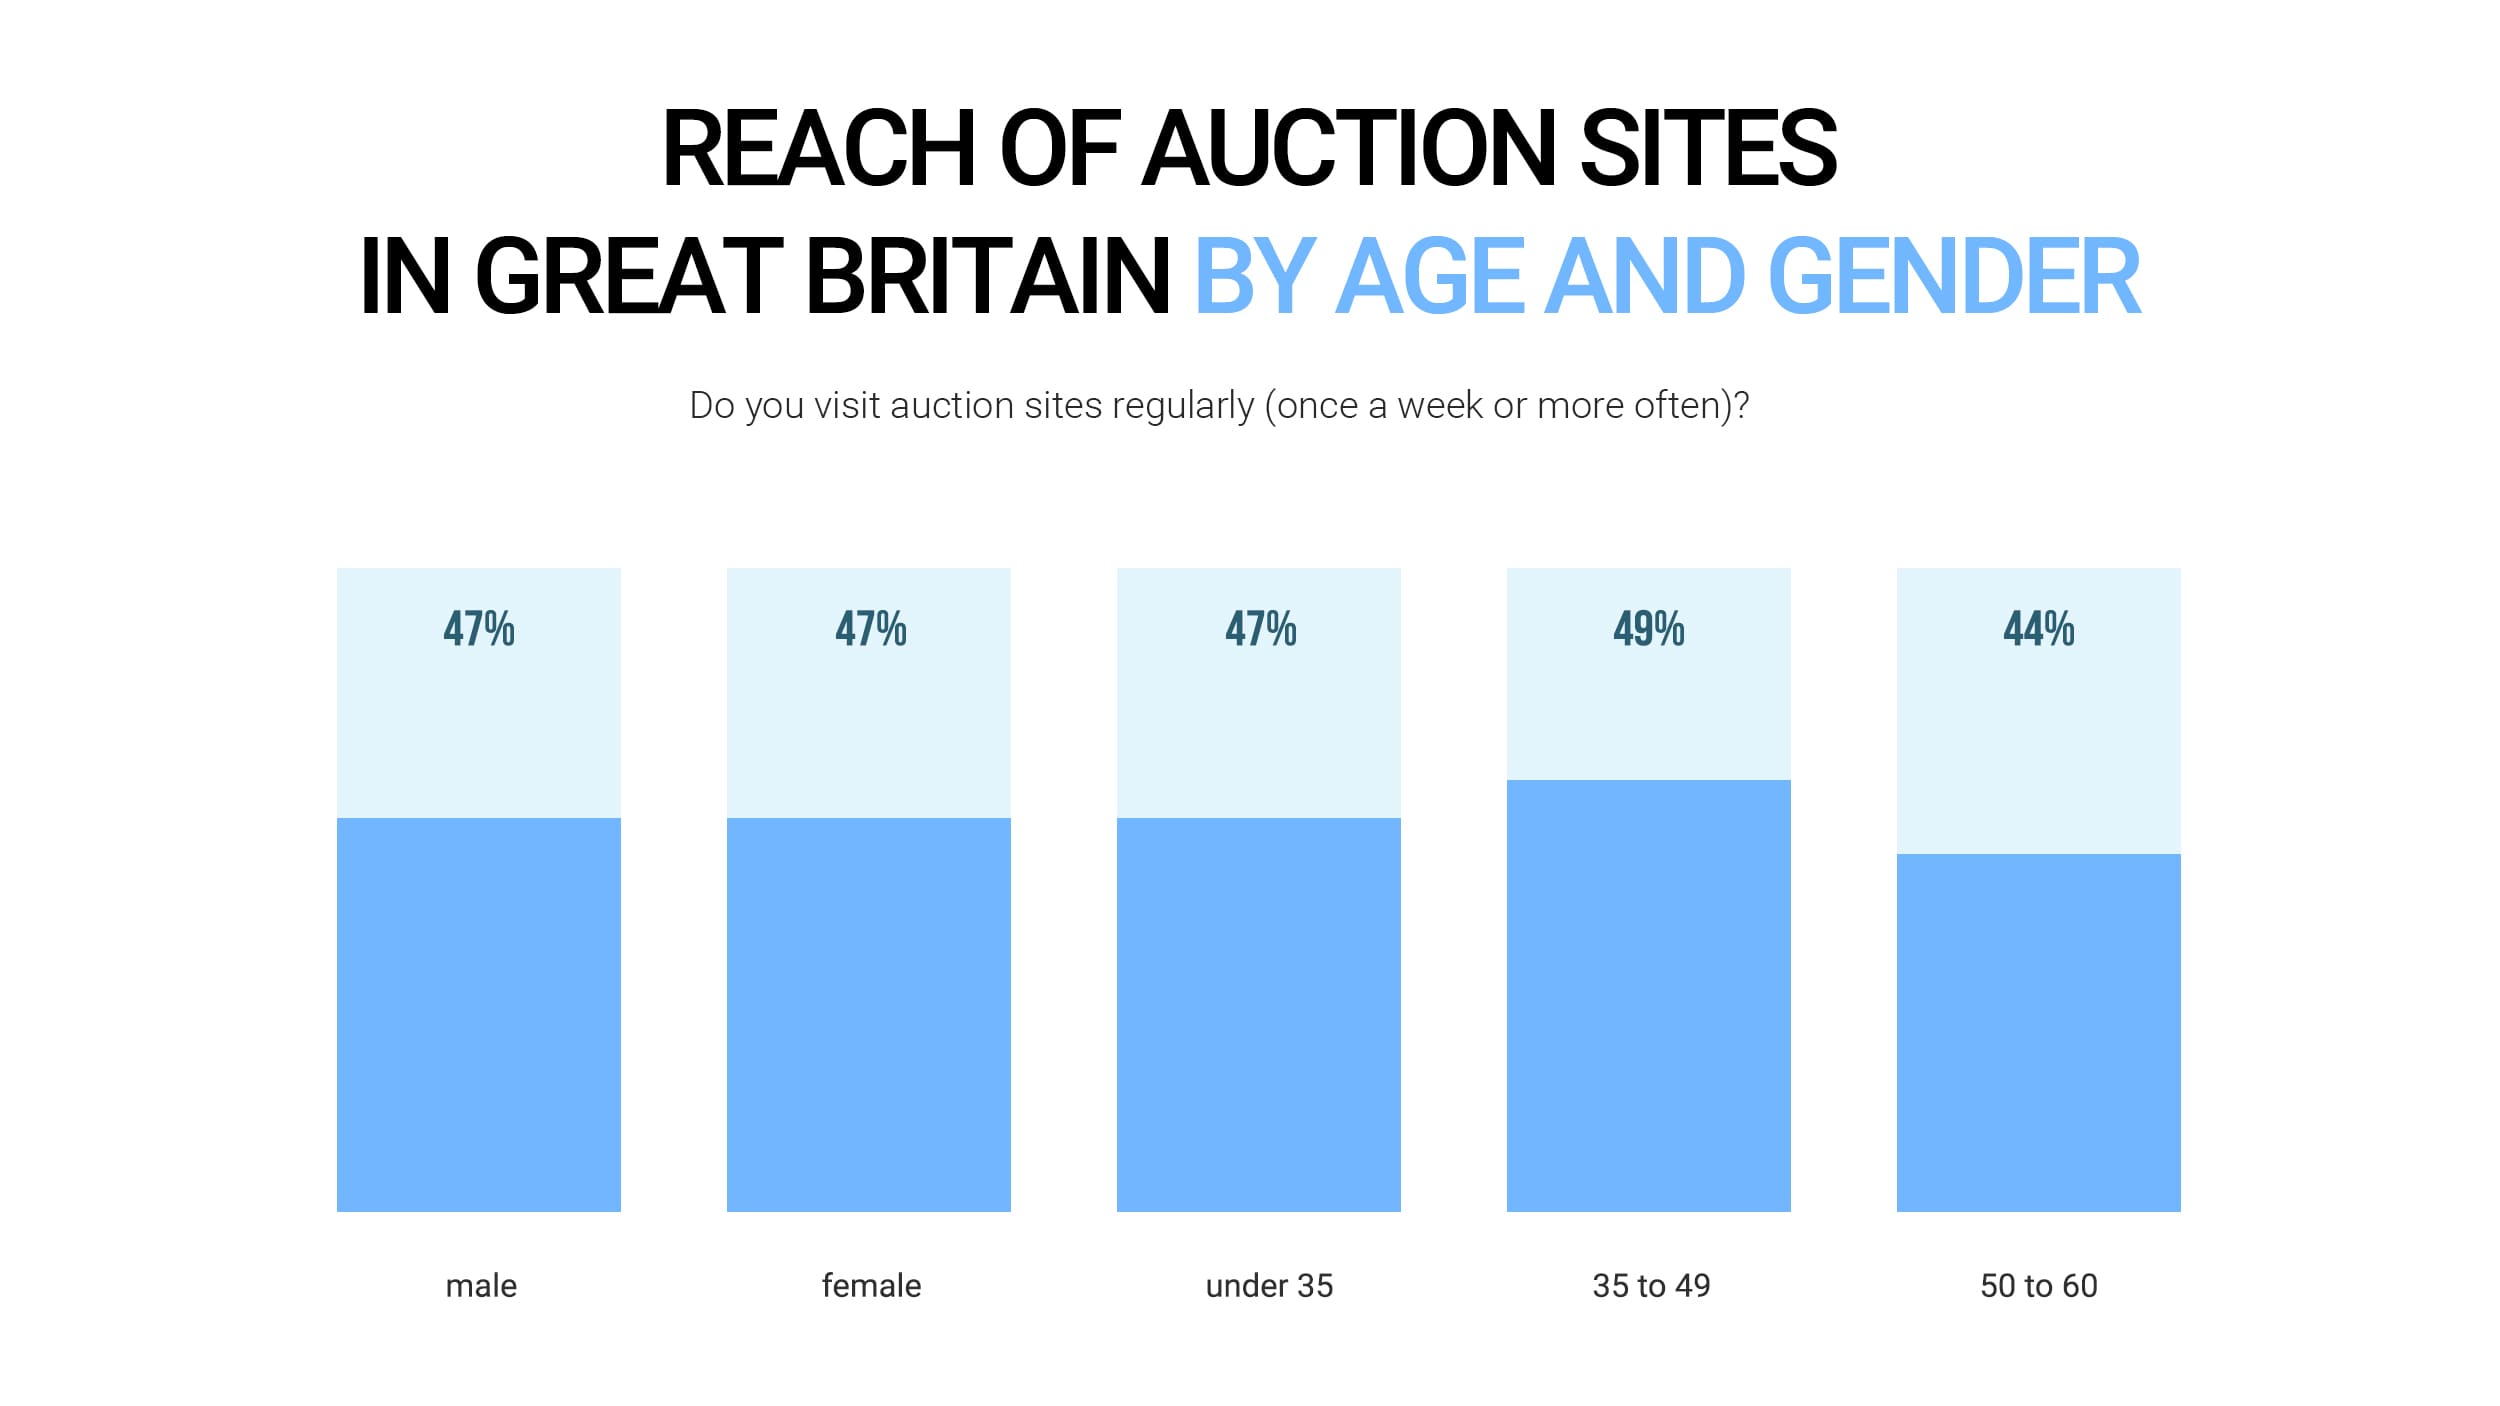 Reach of auction sites in Great Britain by age and gender